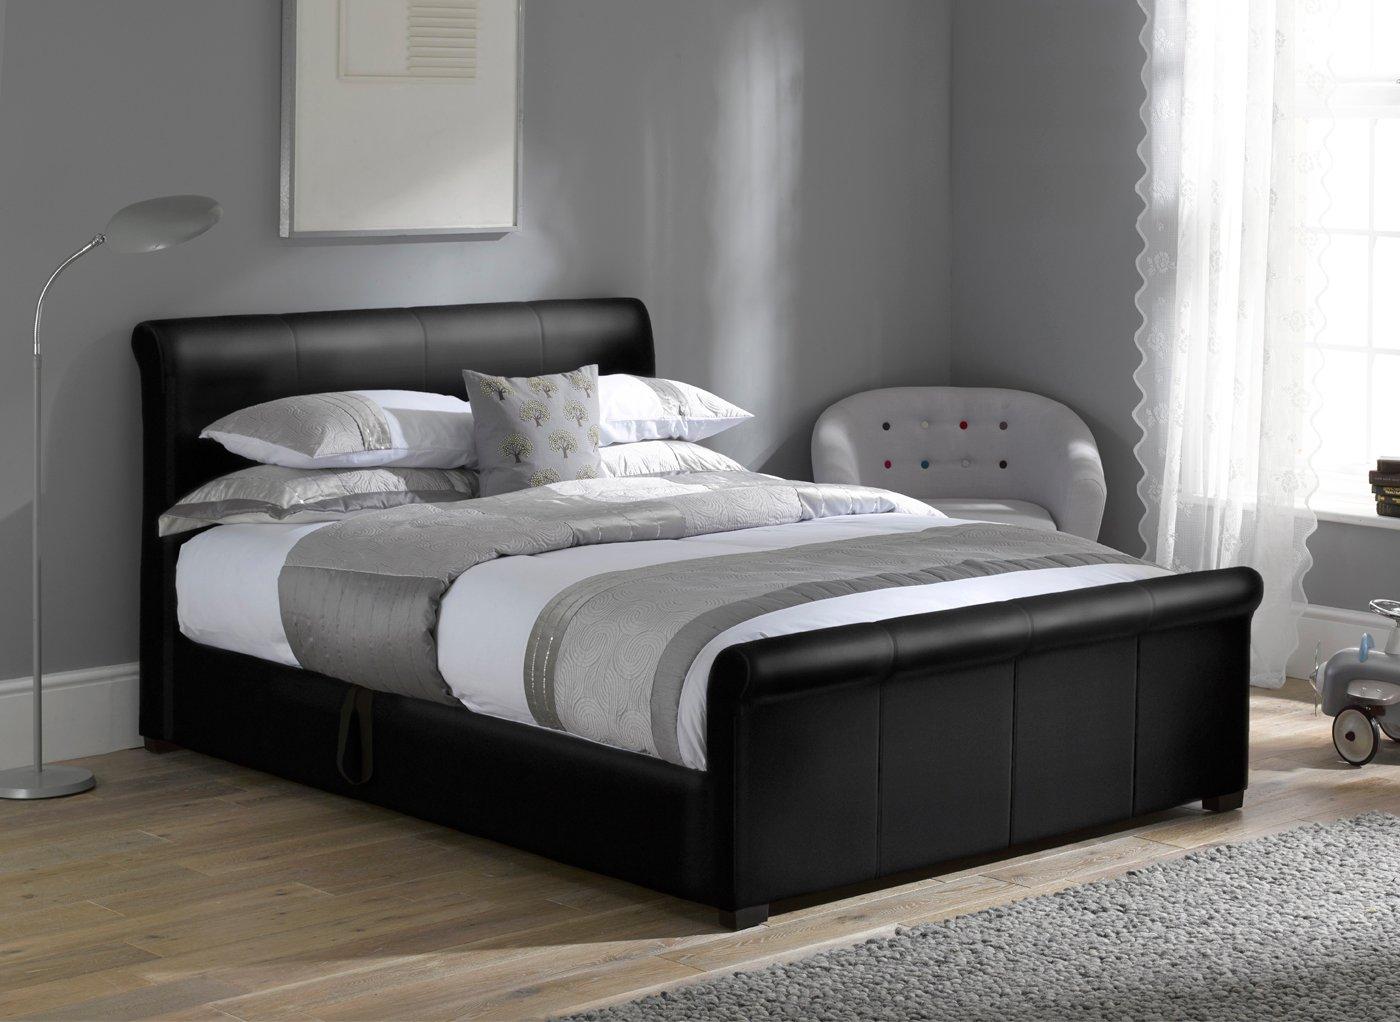 Small Double Beds Queen Size Beds Dreams